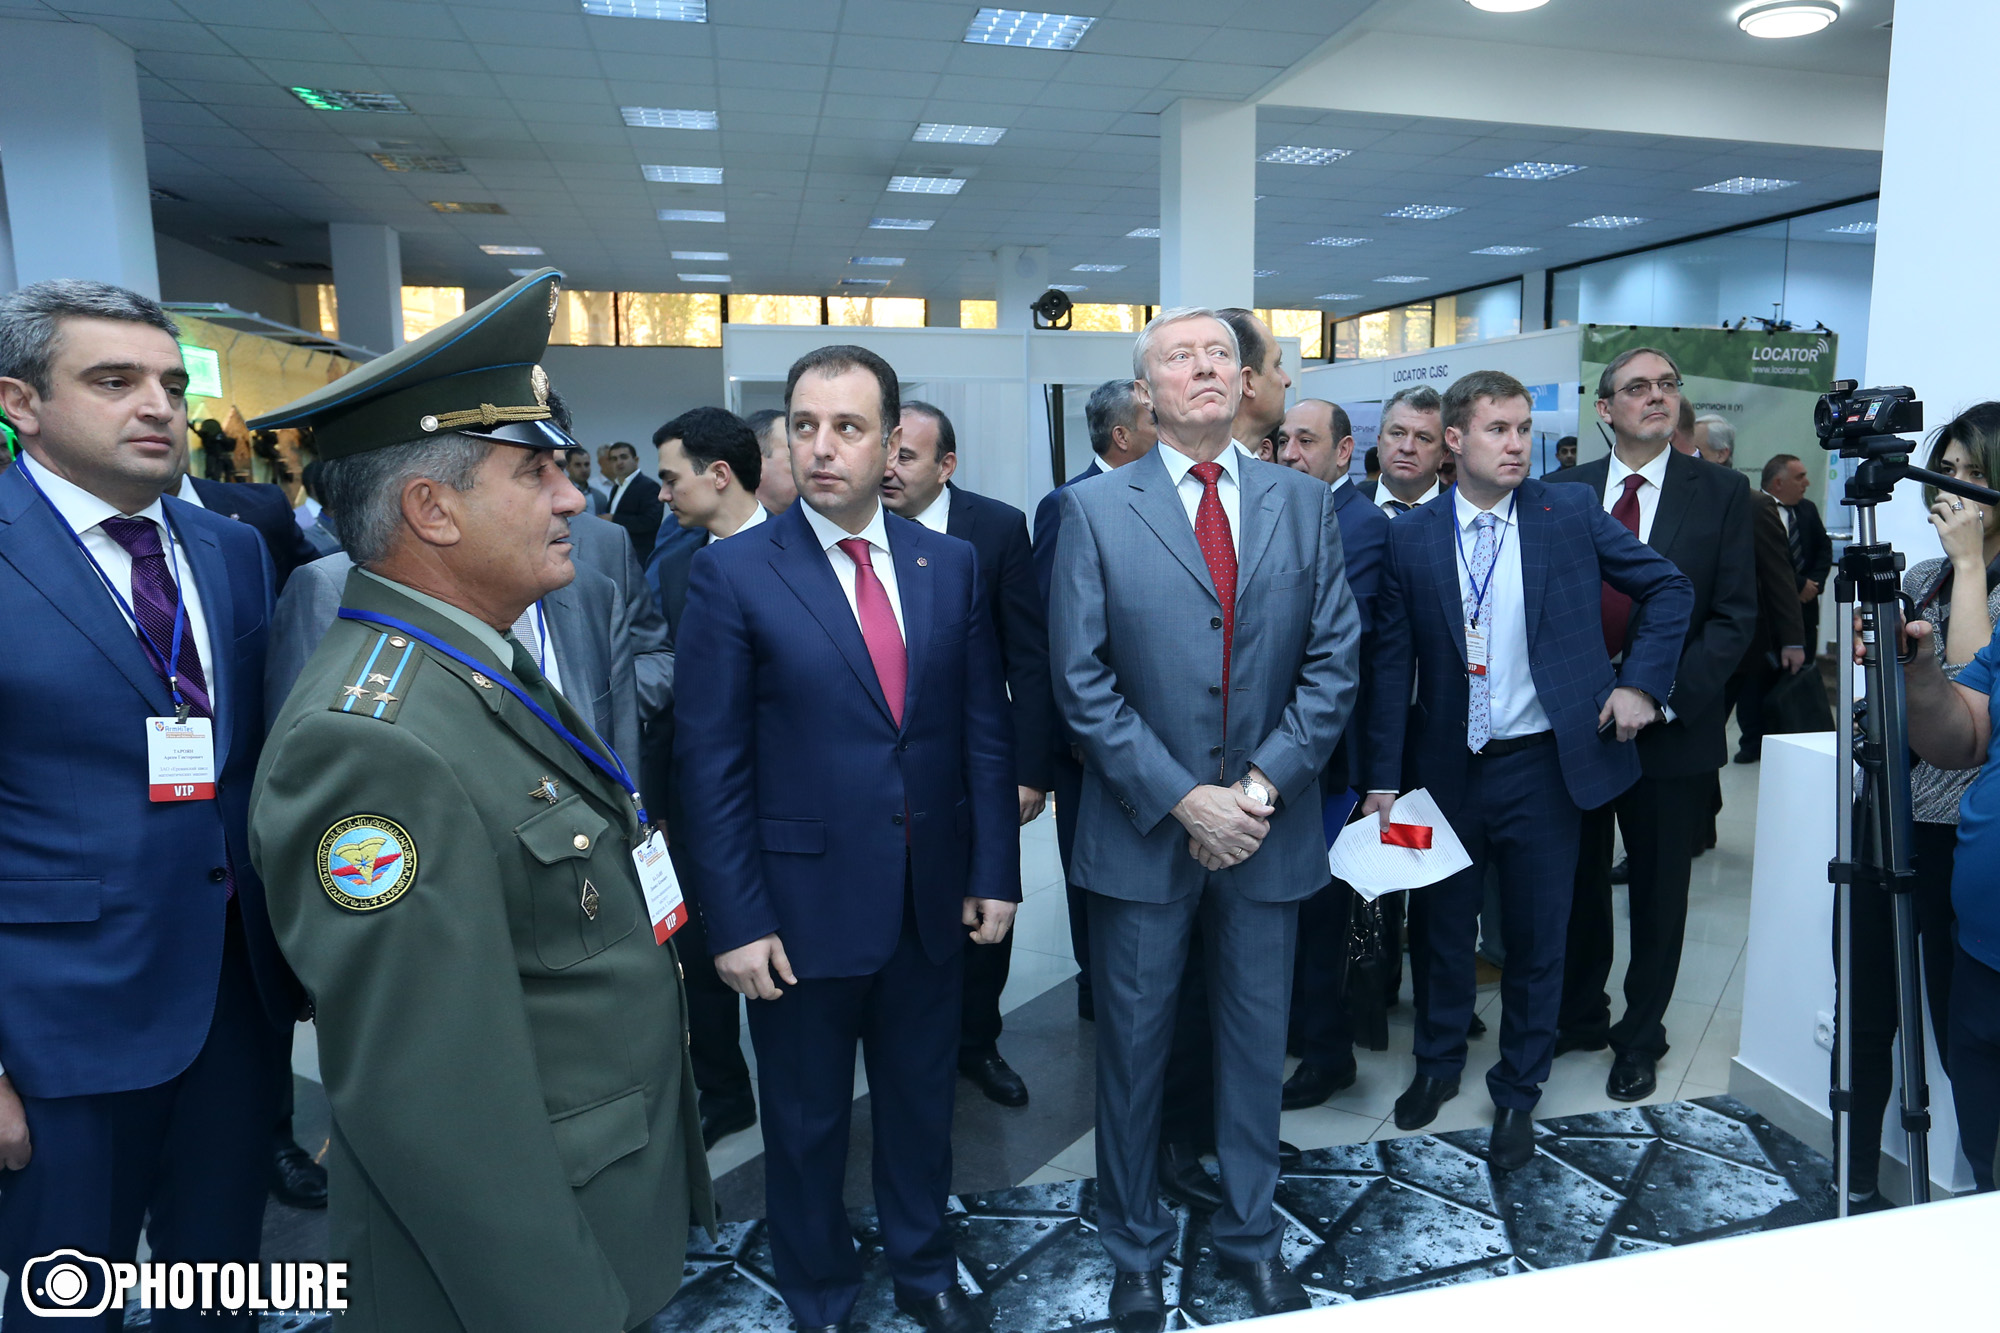 Opening ceremony of 'ArmHiTec-2016' the first international exhibition of armaments and defense technologies took place at Yerevan Expo